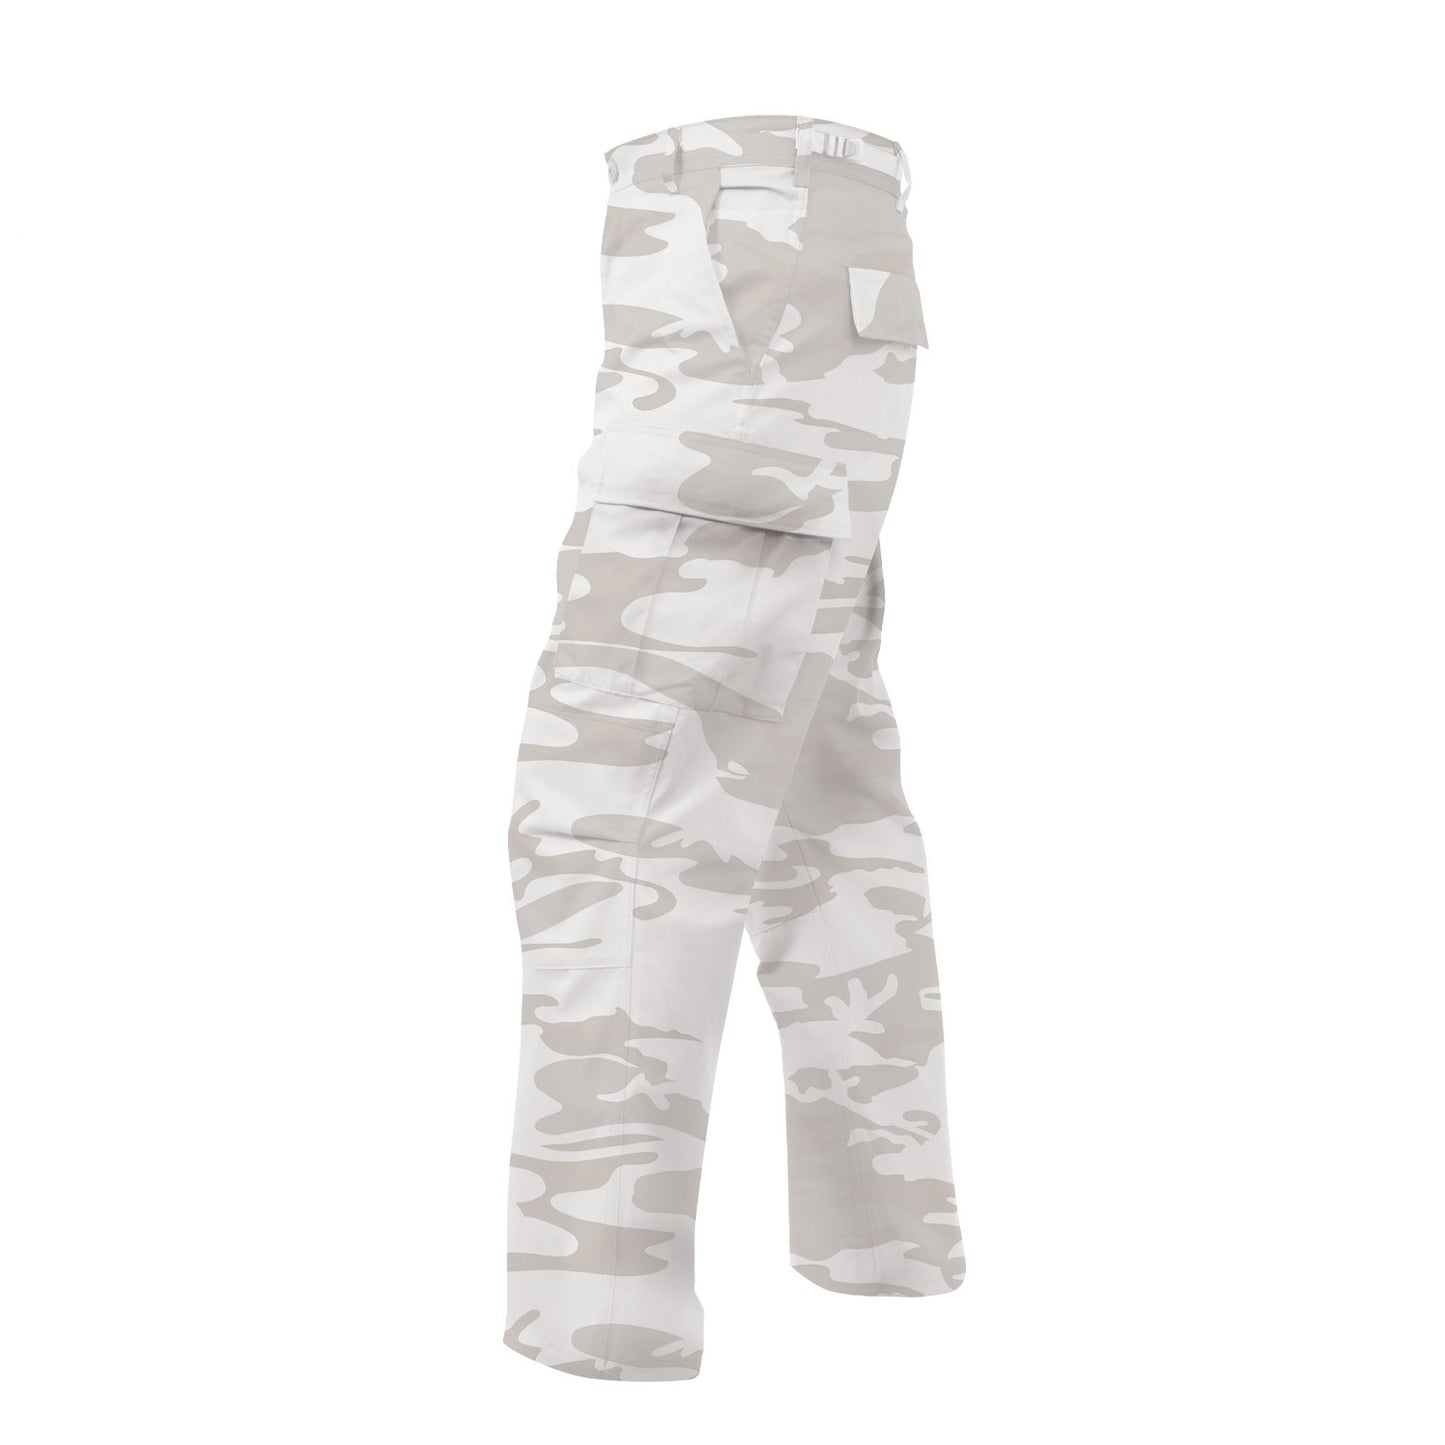 Rothco White Camouflage Tactical BDU Camo Pants